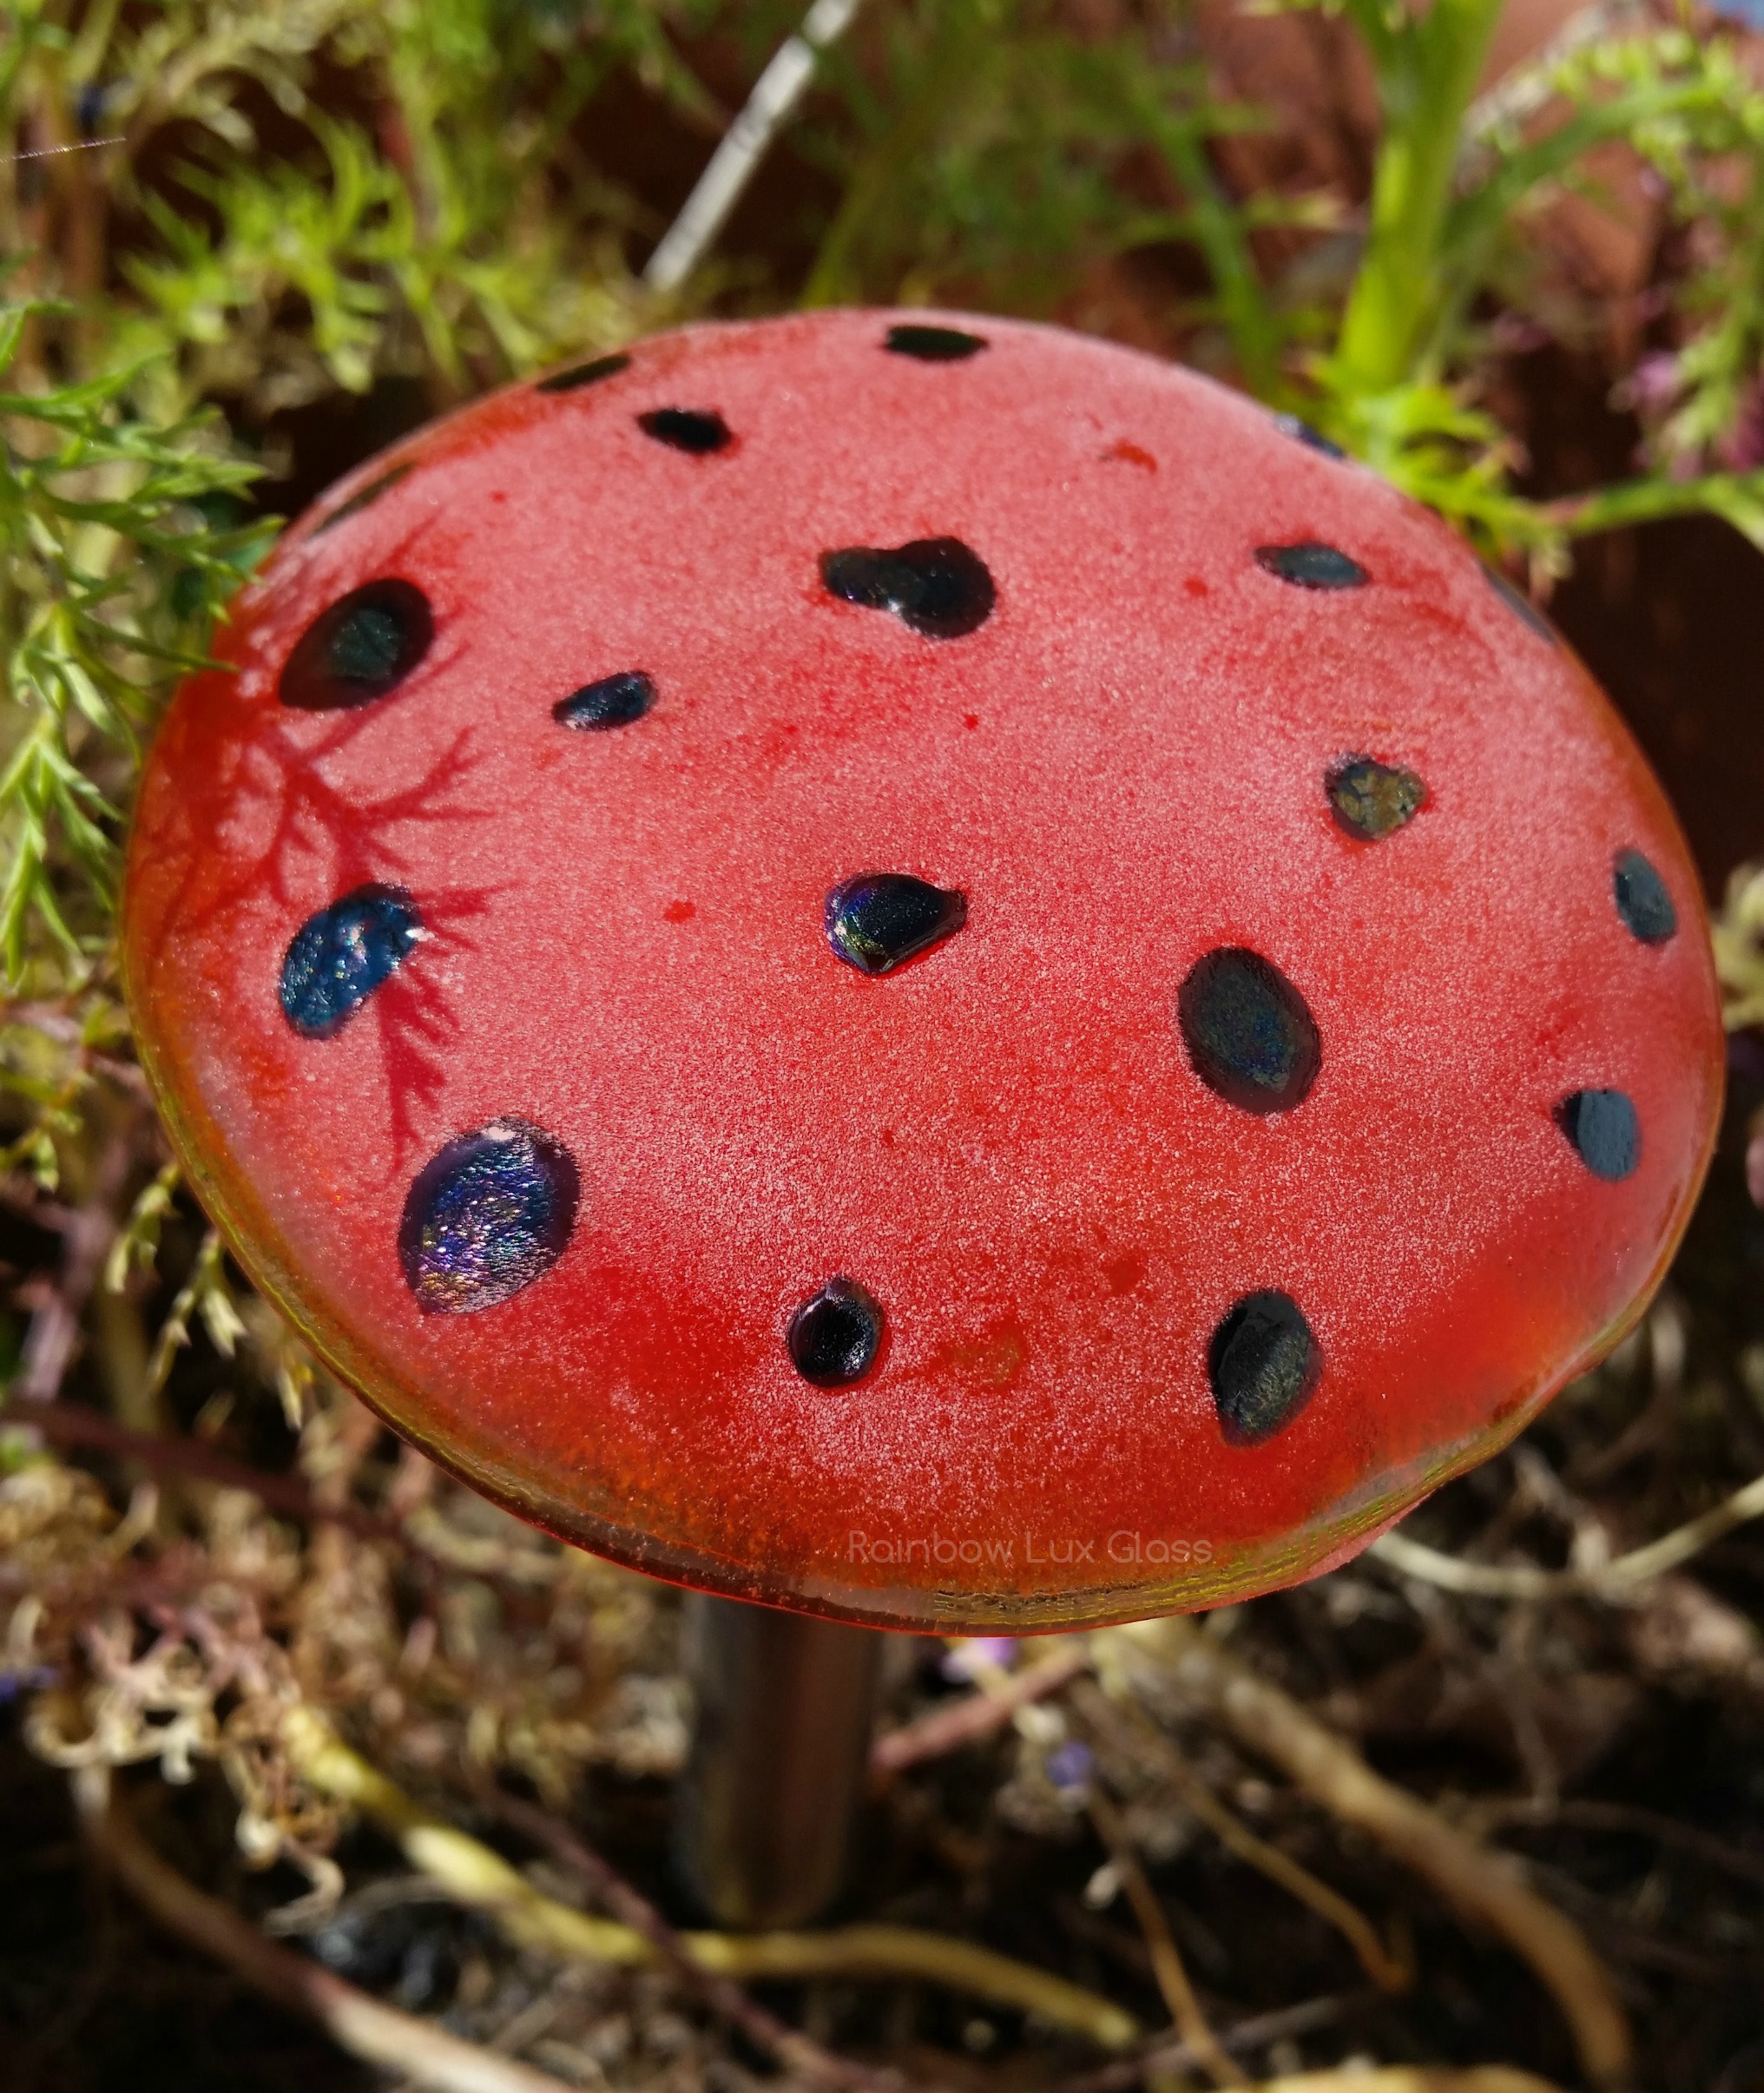 Red and Black Iridescent Spot Toadstool Mushrooms